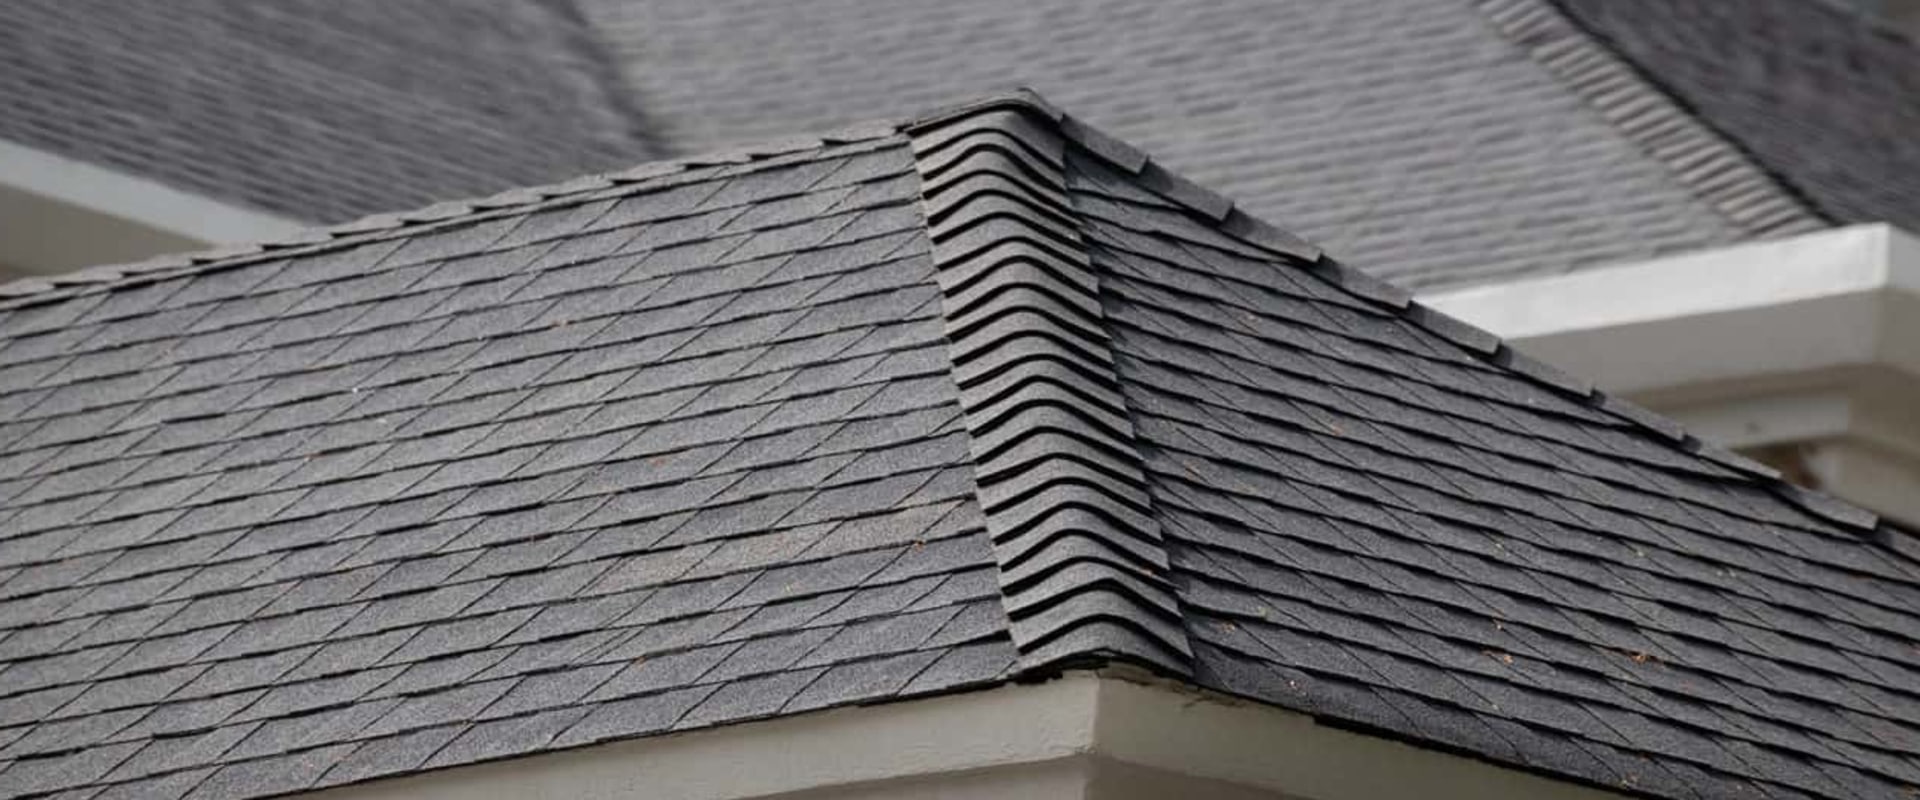 Enhance Your Home Remodel With Synthetic Slate Roofing Services In McLean, VA